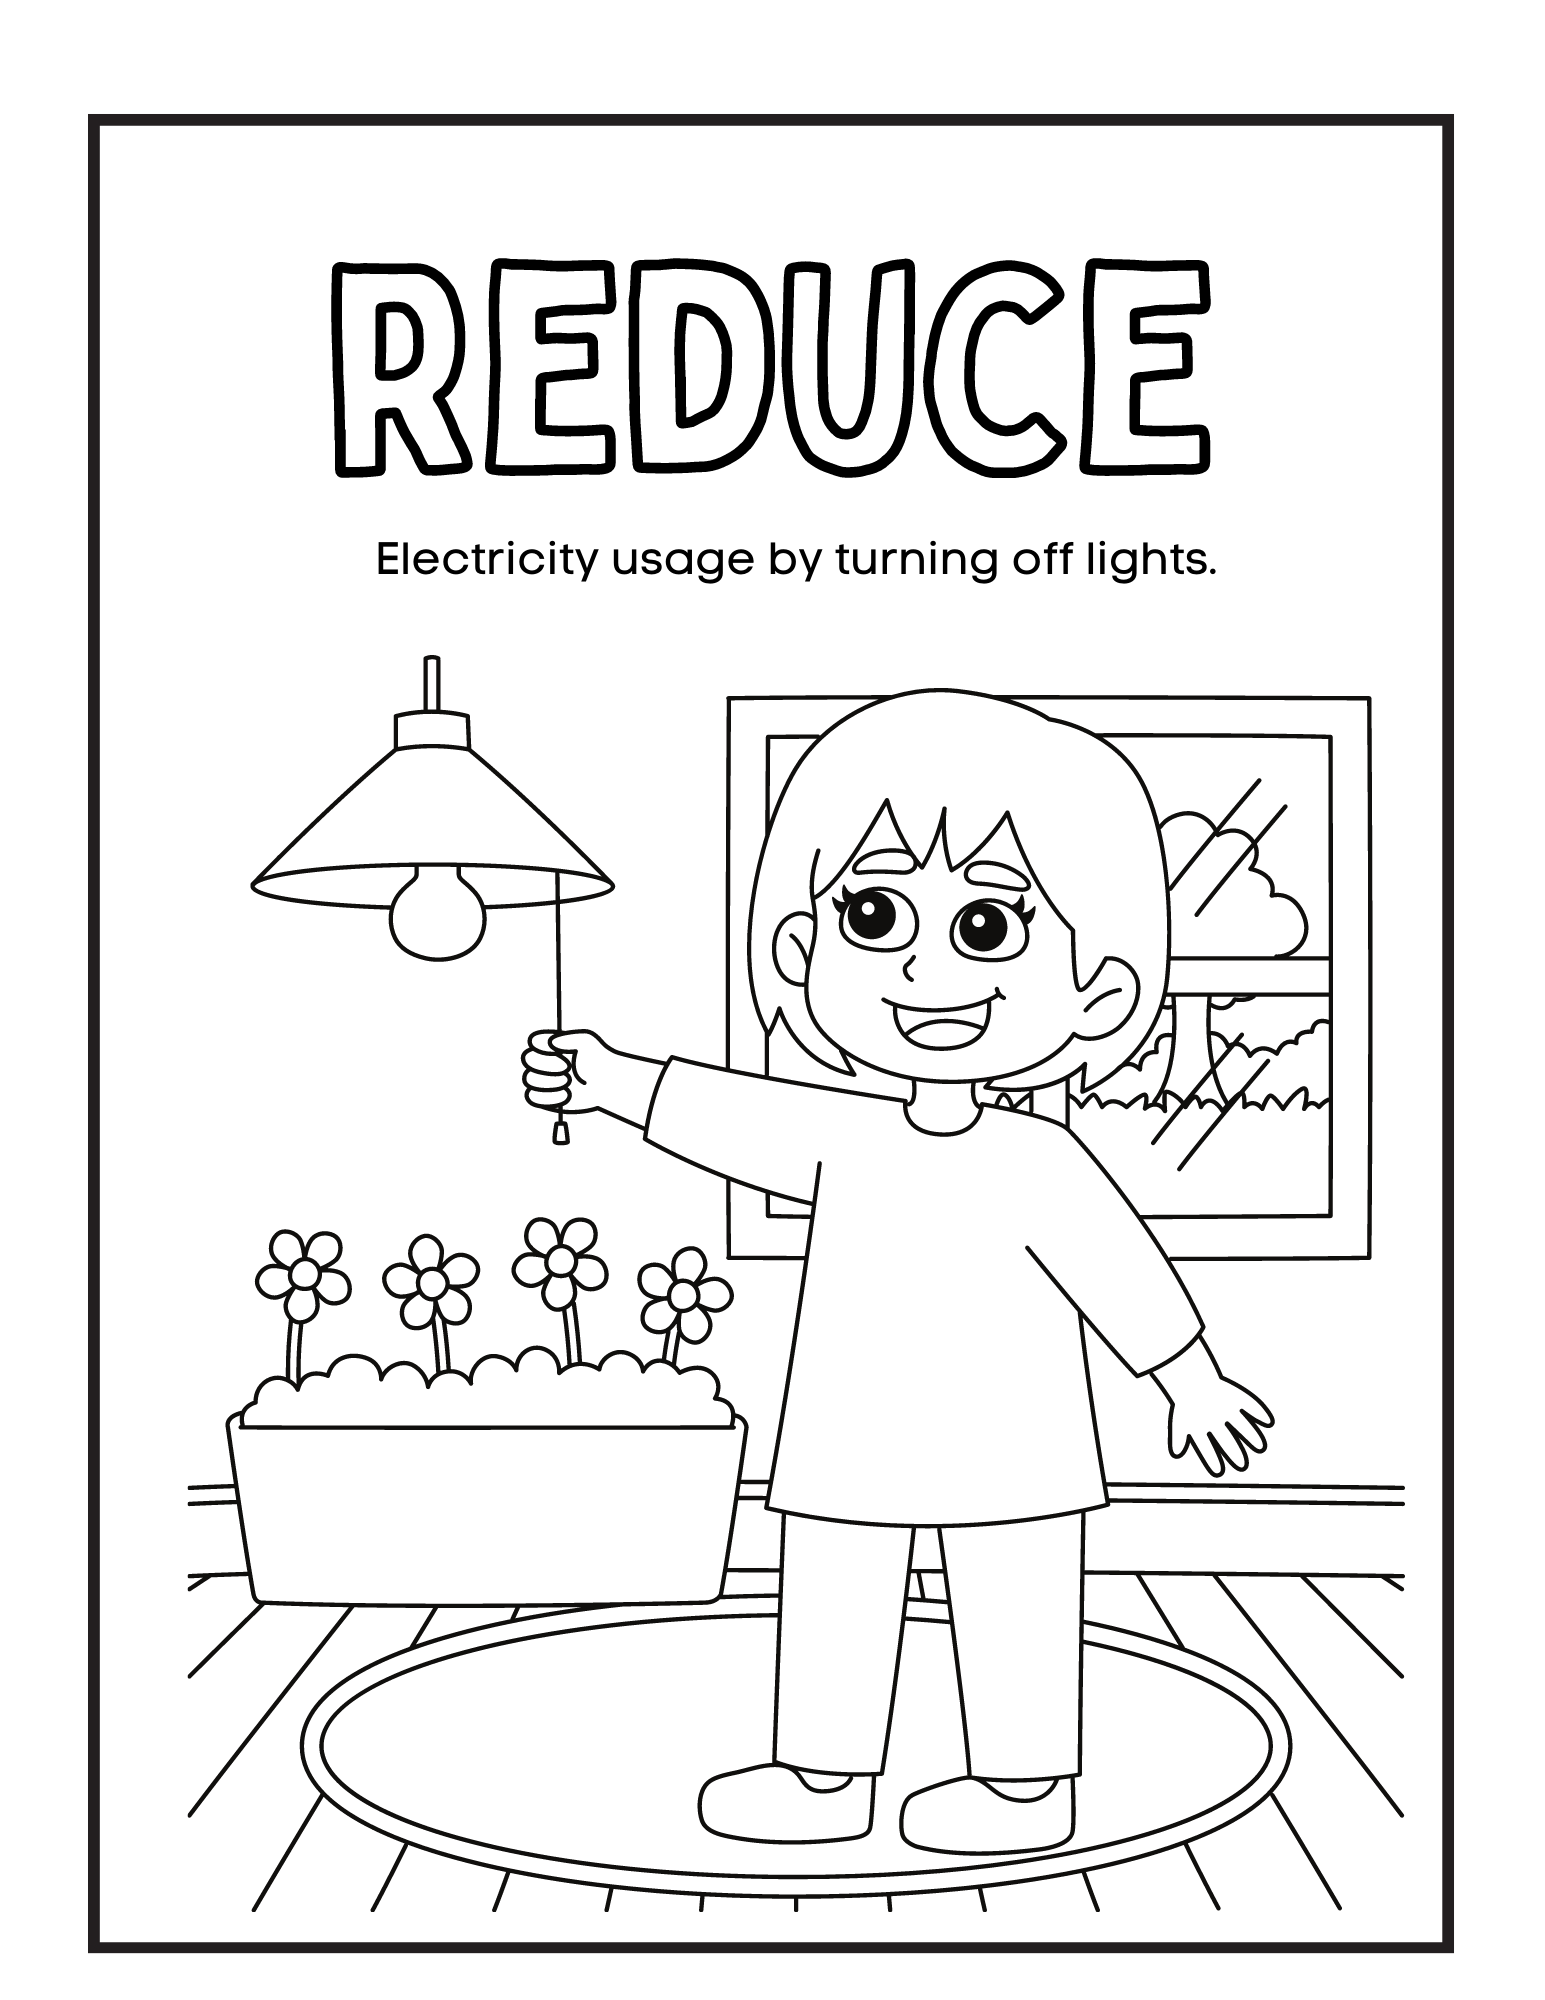 Reduce reuse recycle coloring pages â